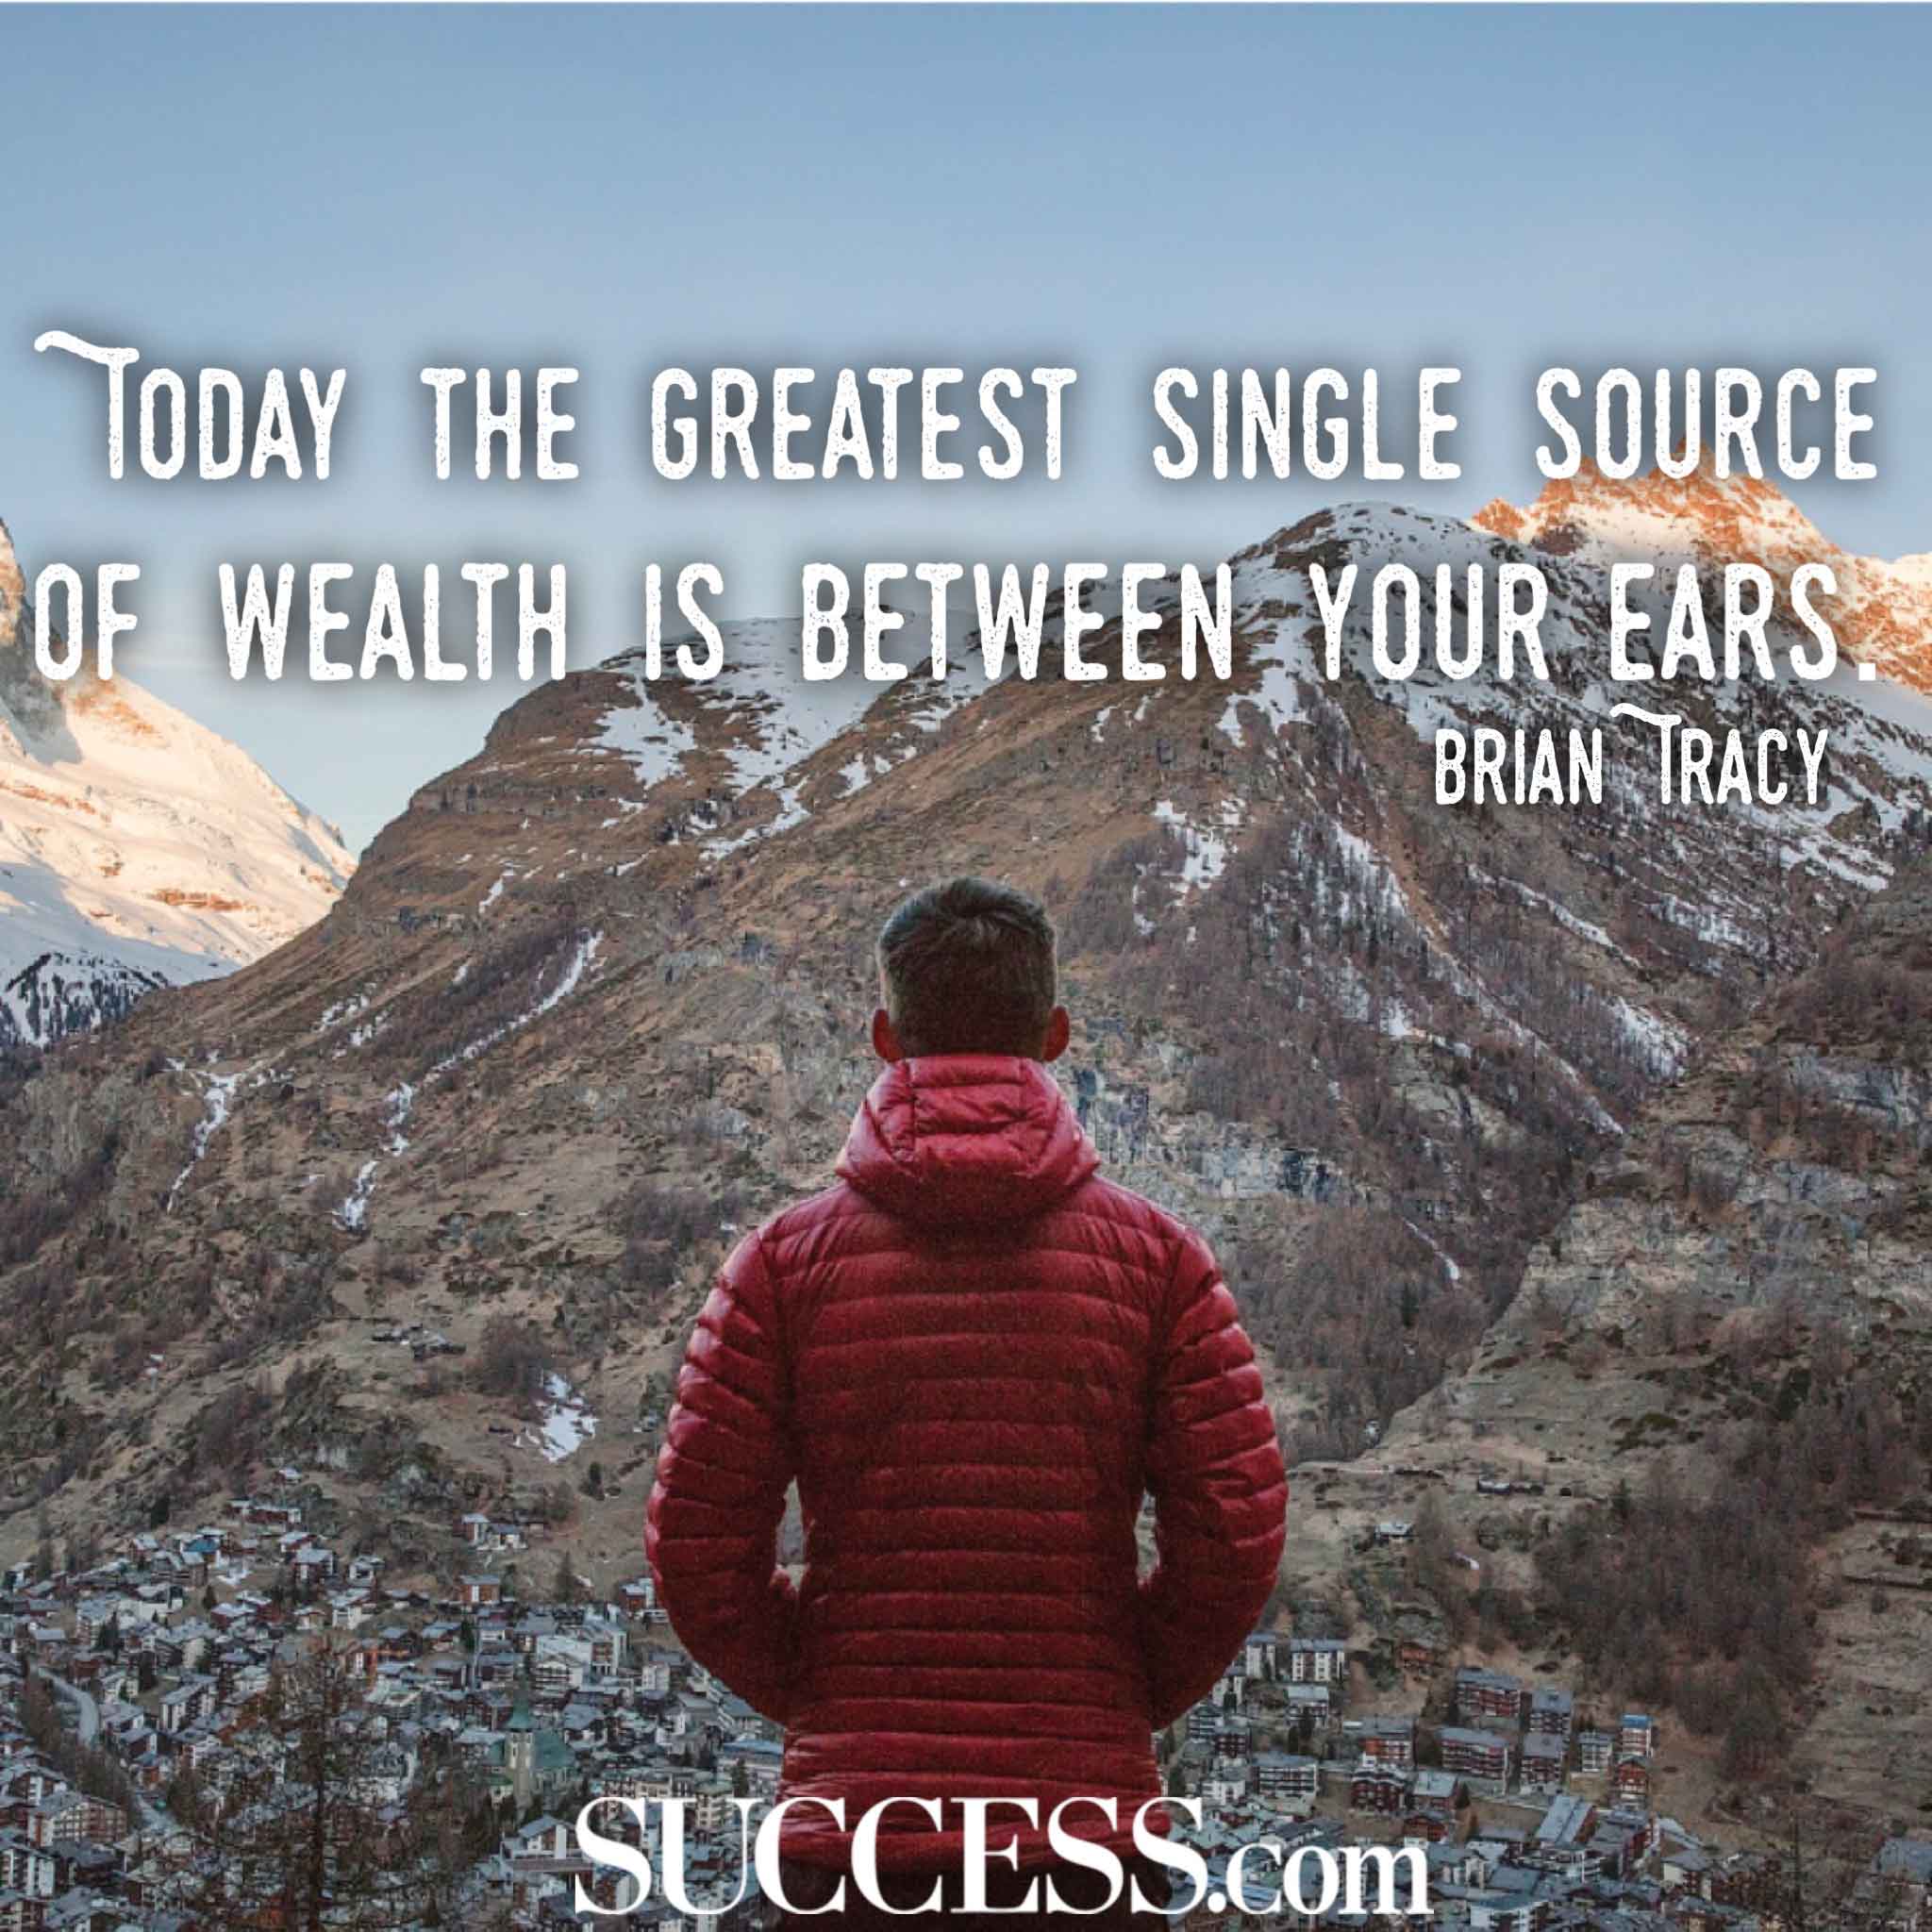 17 Motivating Quotes About Becoming Rich